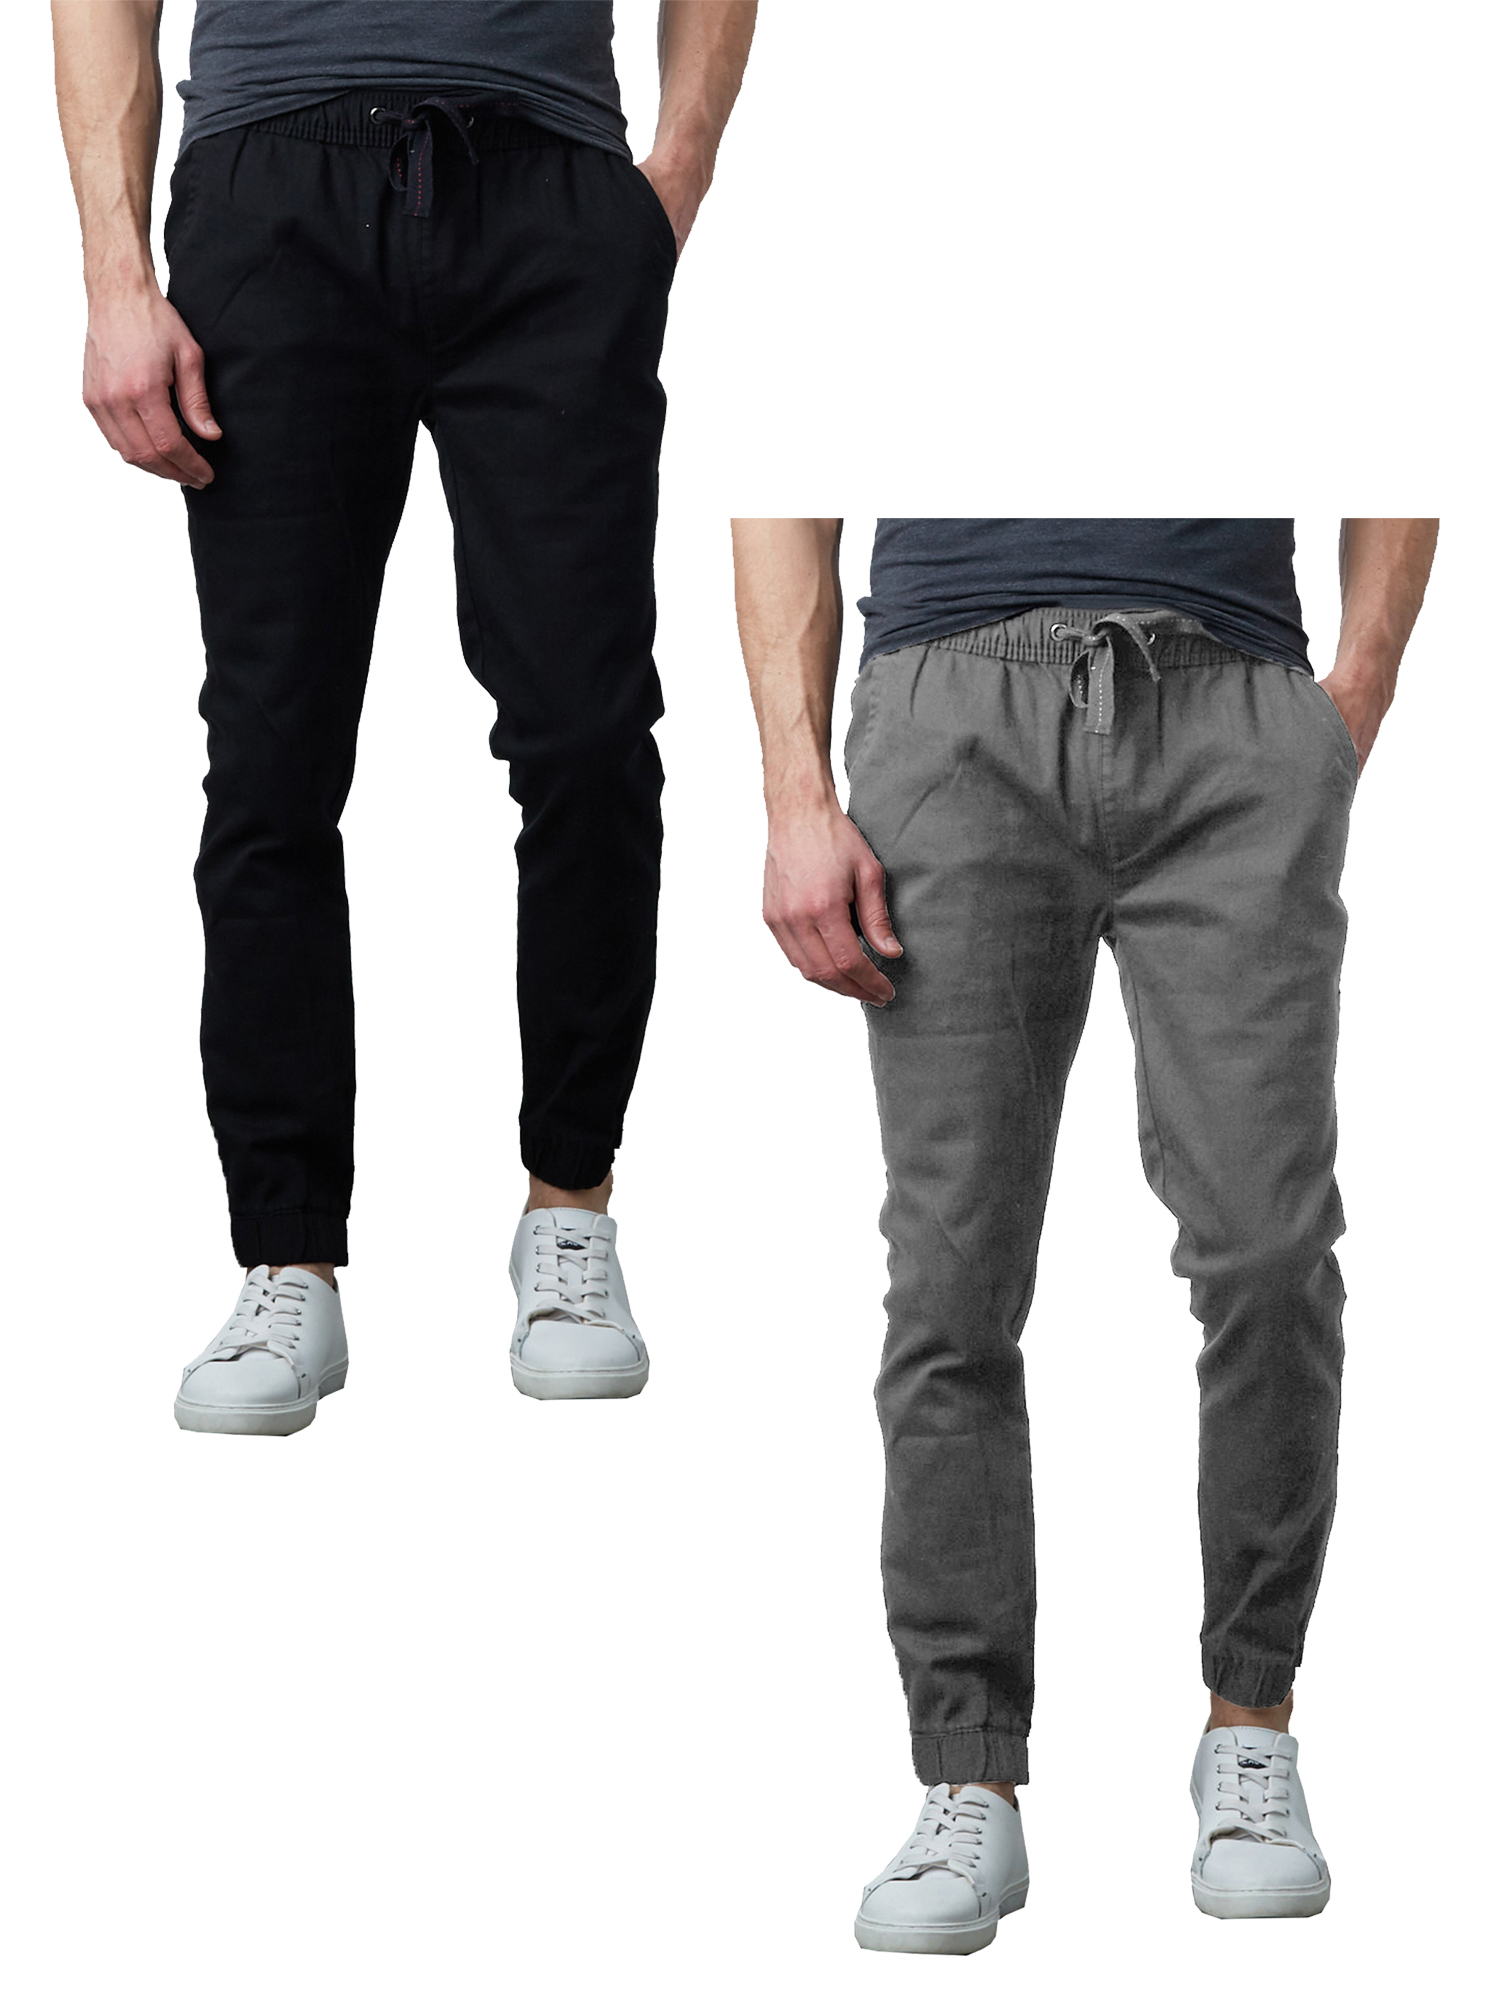 2-Pack Mens Slim-Fit Cotton Twill Jogger Pants (S-2XL) - image 5 of 13